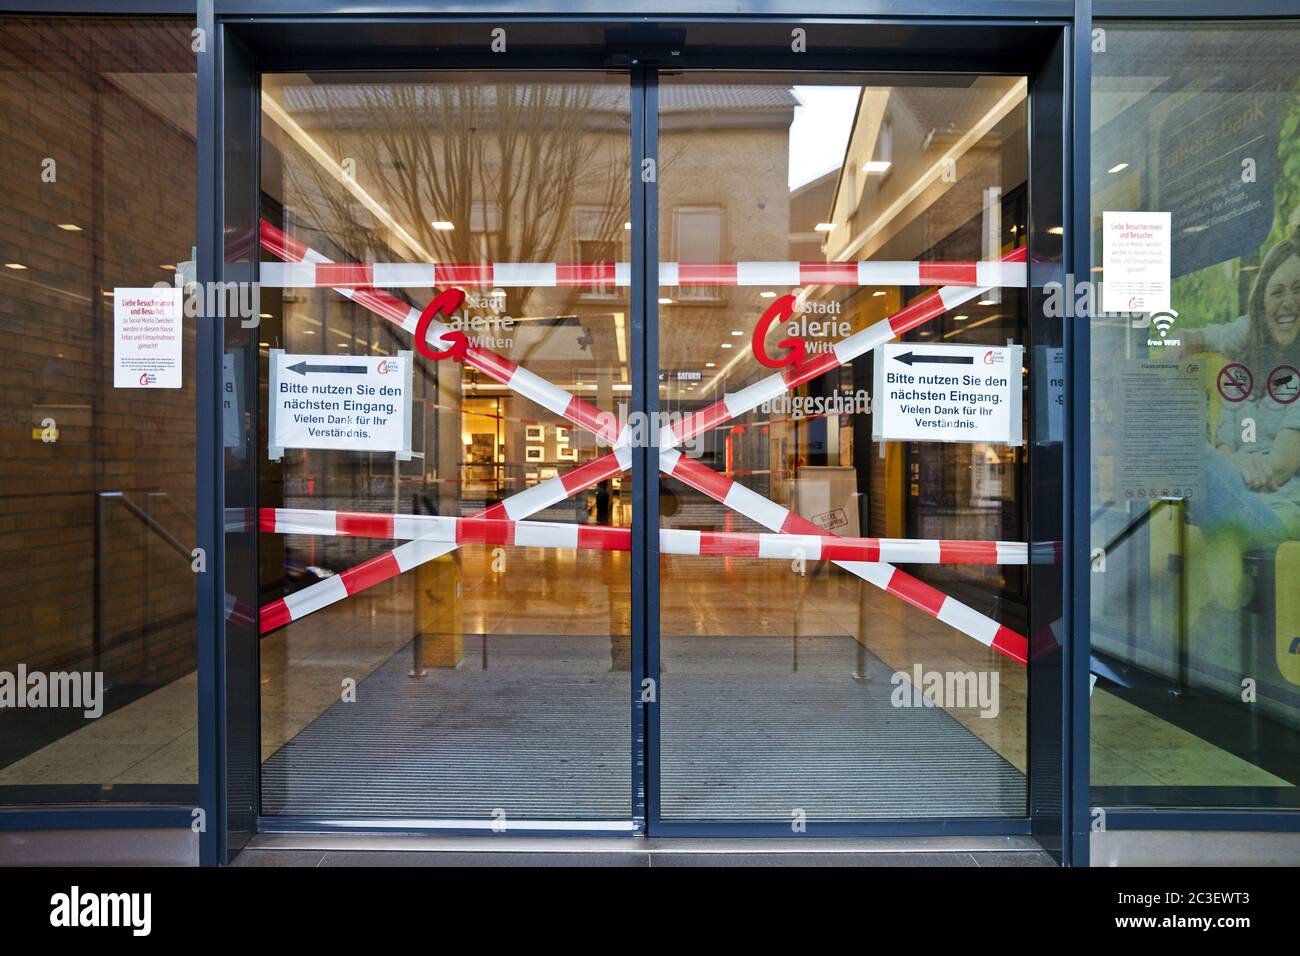 closed shopping center “Stadtgalerie”, Corona crisis, March 2020, Witten, Germany, Europe Stock Photo